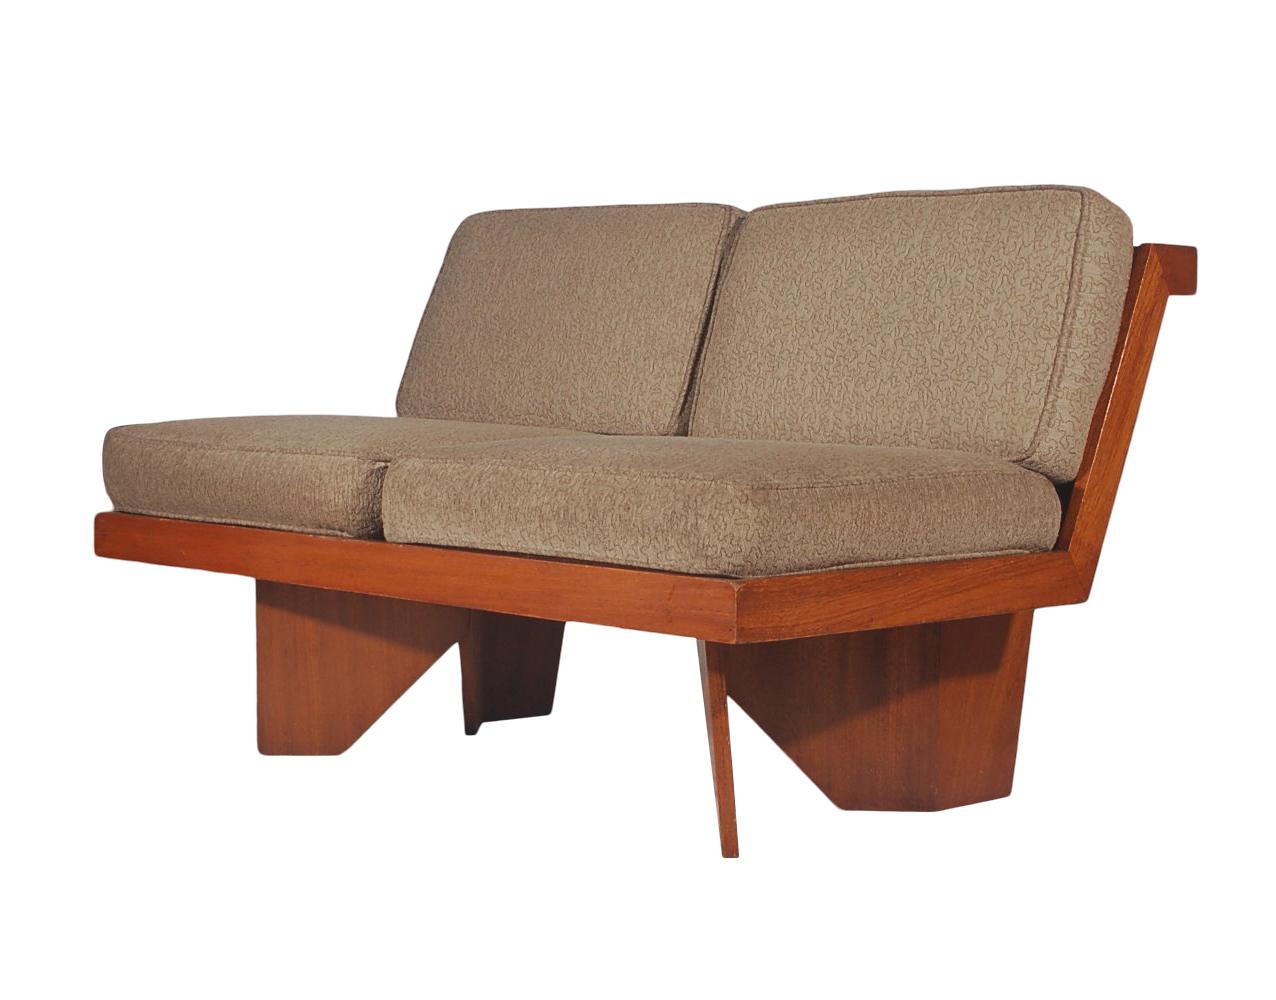 American Midcentury Craftsman Modern Plywood Loveseat or Sofa after Frank Lloyd Wright For Sale